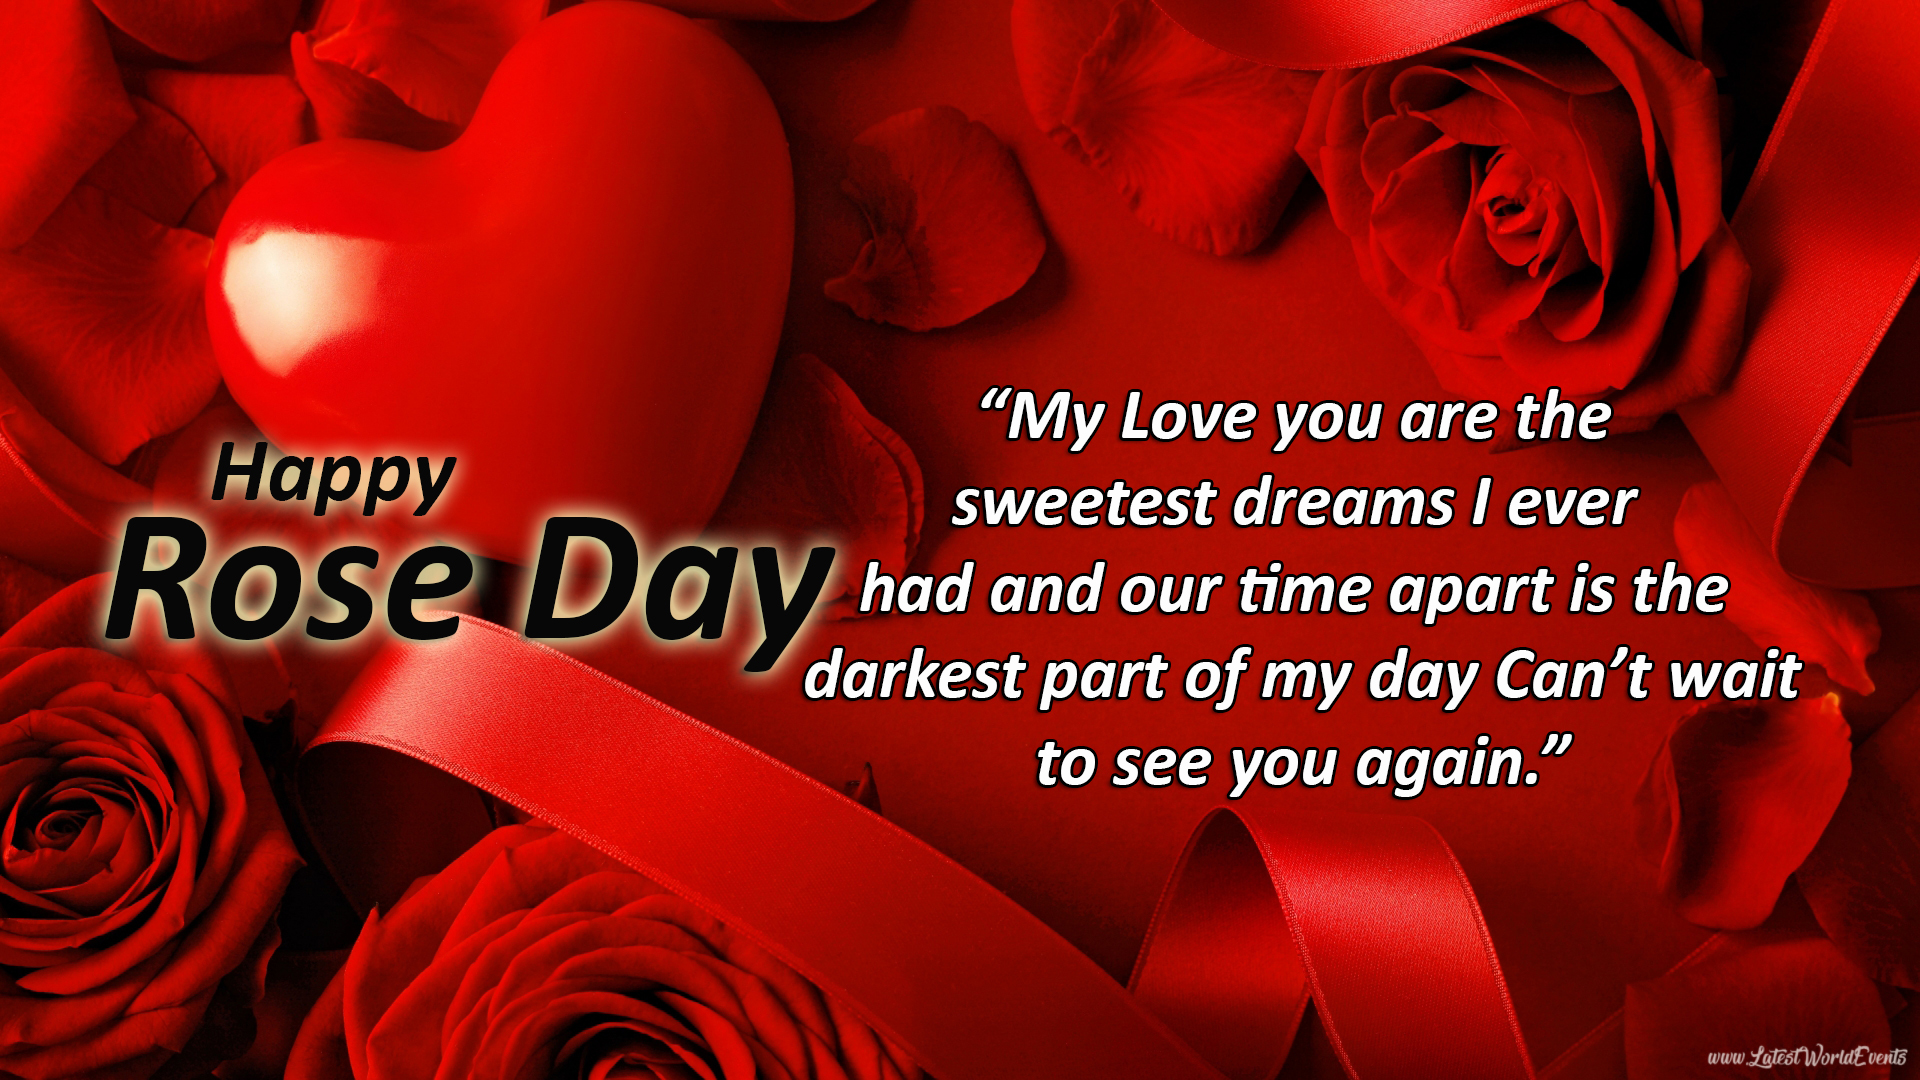 Download-rose-day-special-quotes-for-her